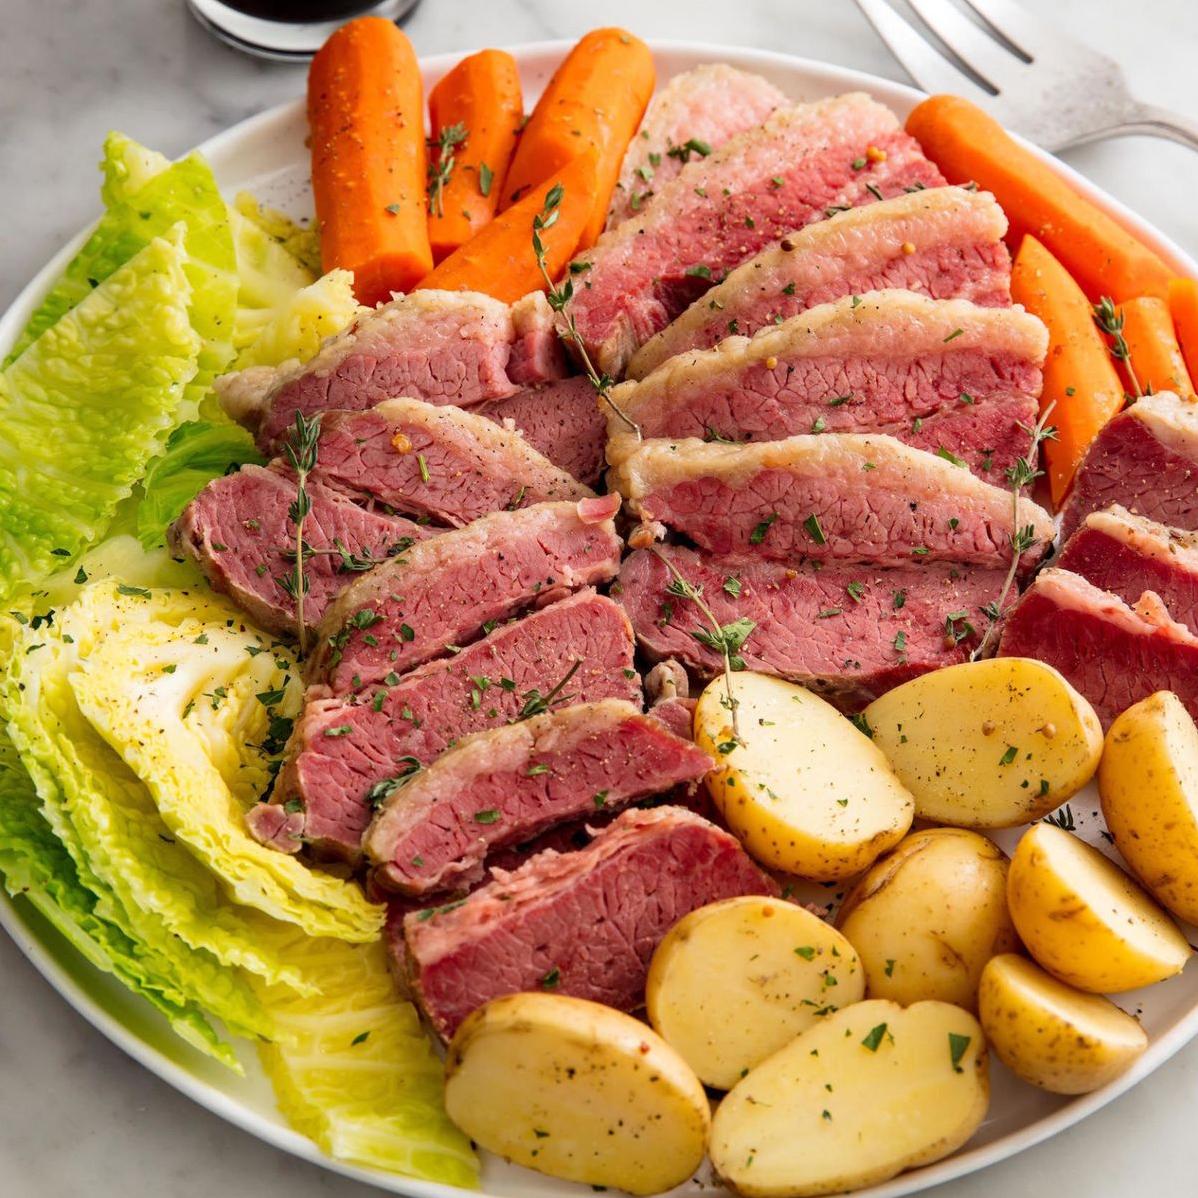  Mouthwatering tender corned beef with braised cabbage